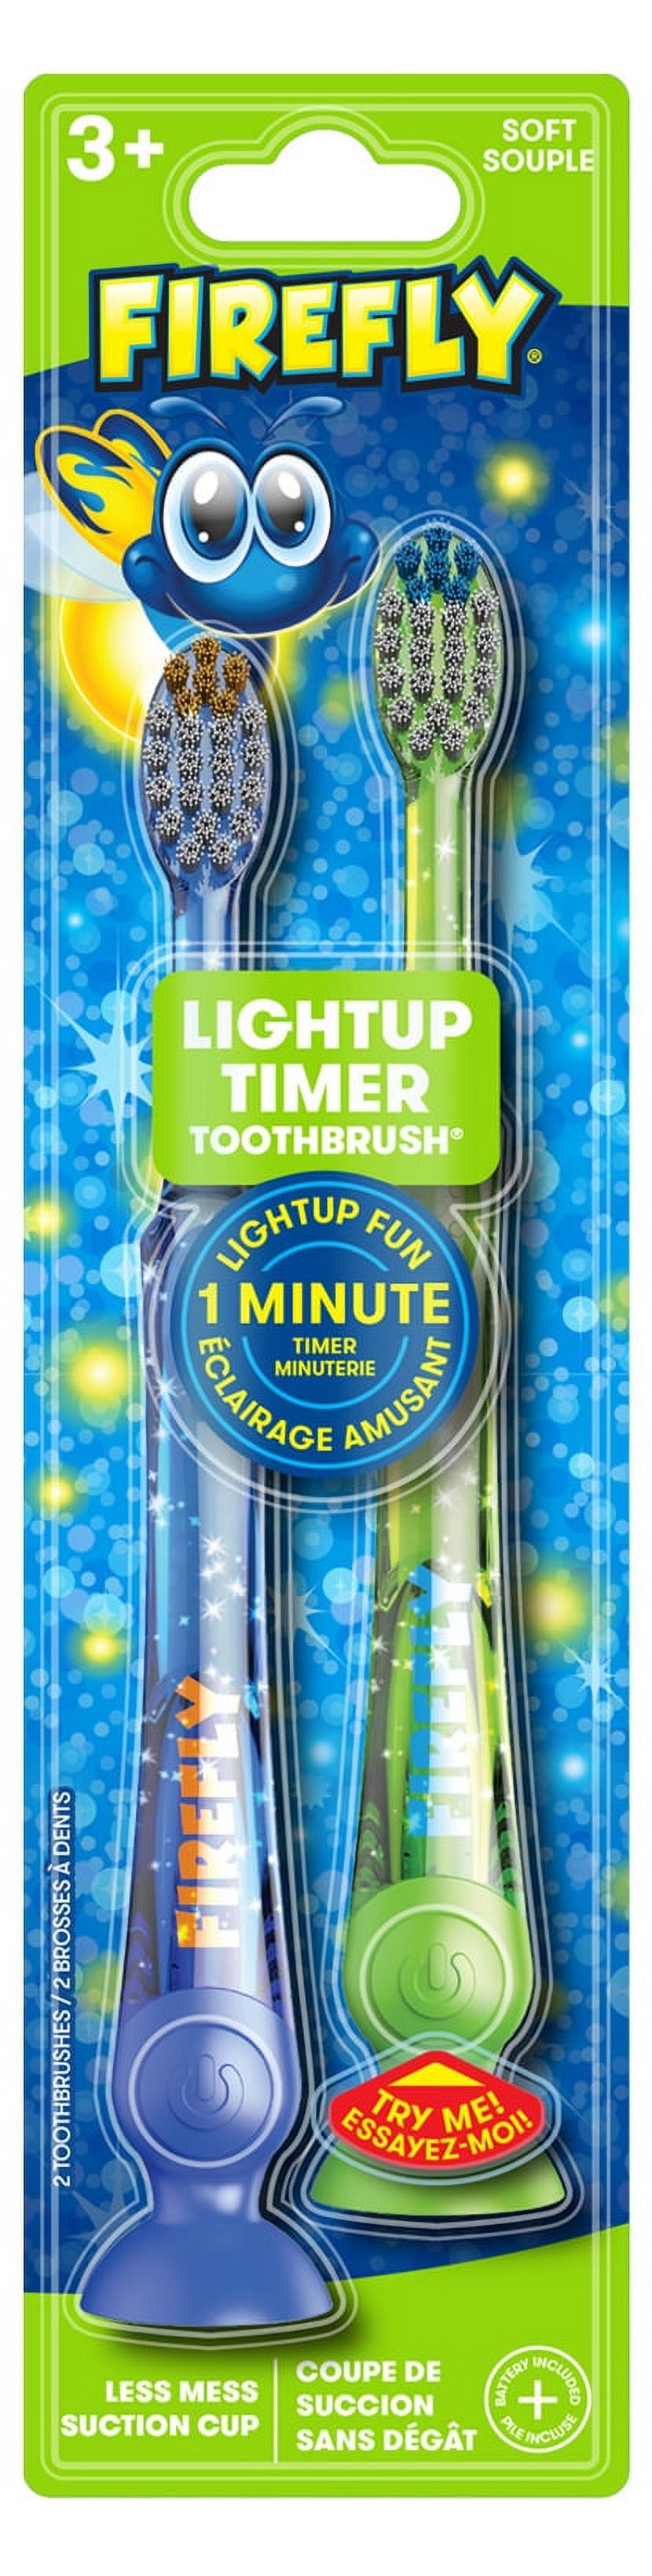 Firefly Light Up Timer Toothbrush, Premium Soft Bristles, Ages 3+, 2 Count (Colors May Vary) - image 1 of 11